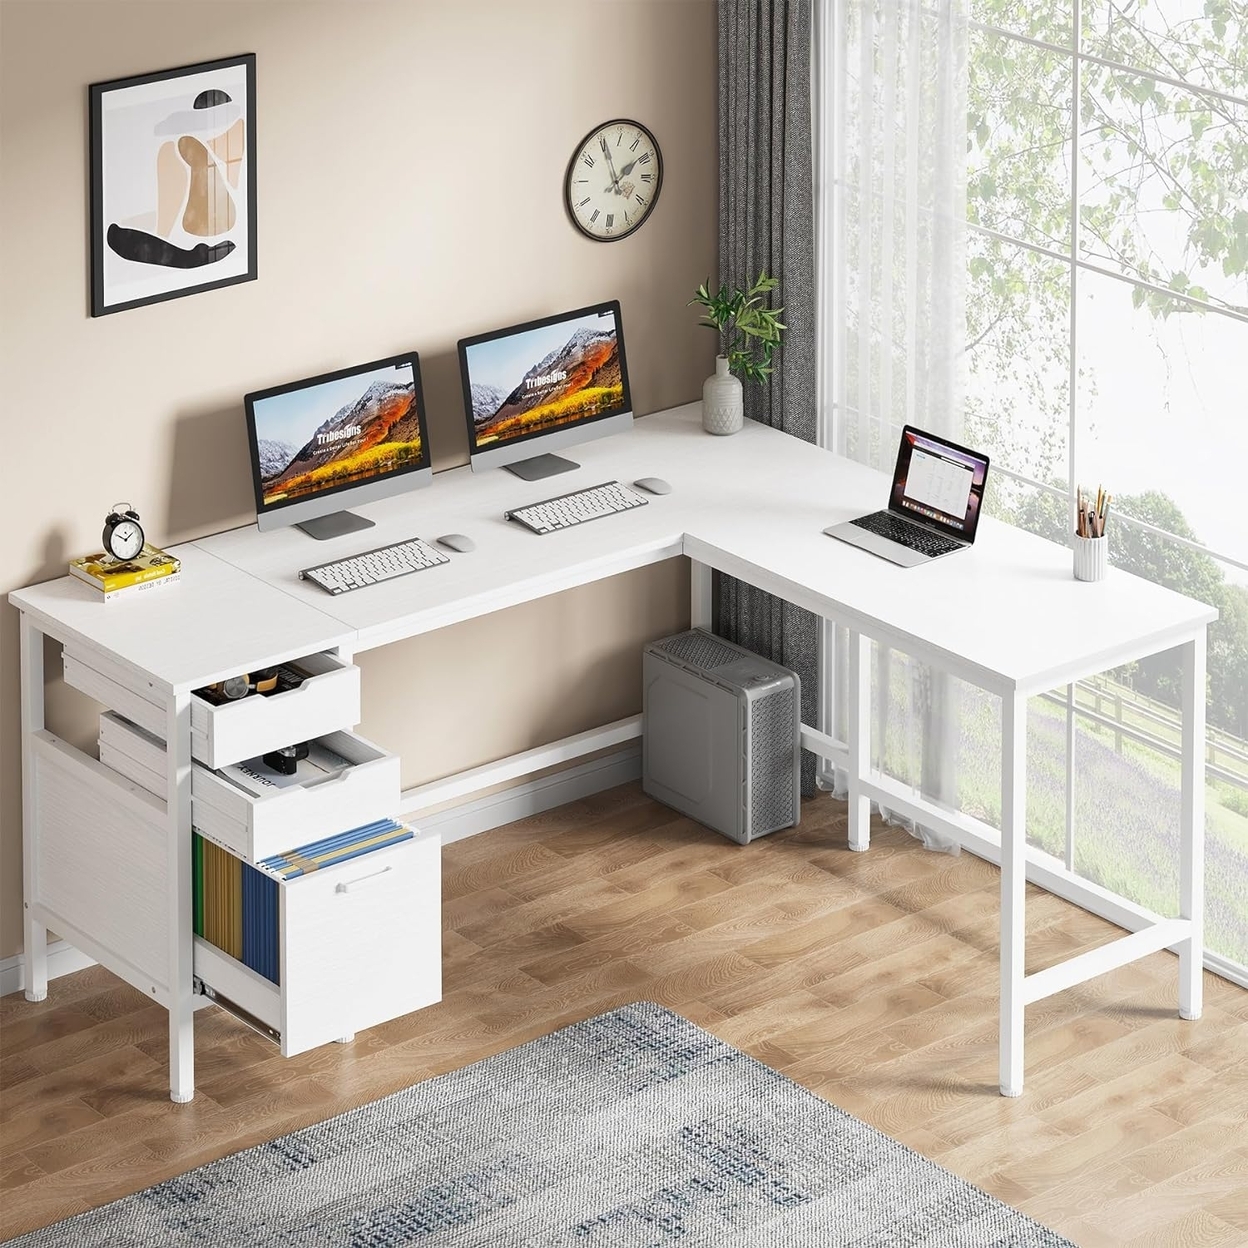 Tribesigns L Shaped Desk With File Drawer Cabinet, 59 Corner Desk L Shaped Computer Desk With Drawers - Rustic Brown